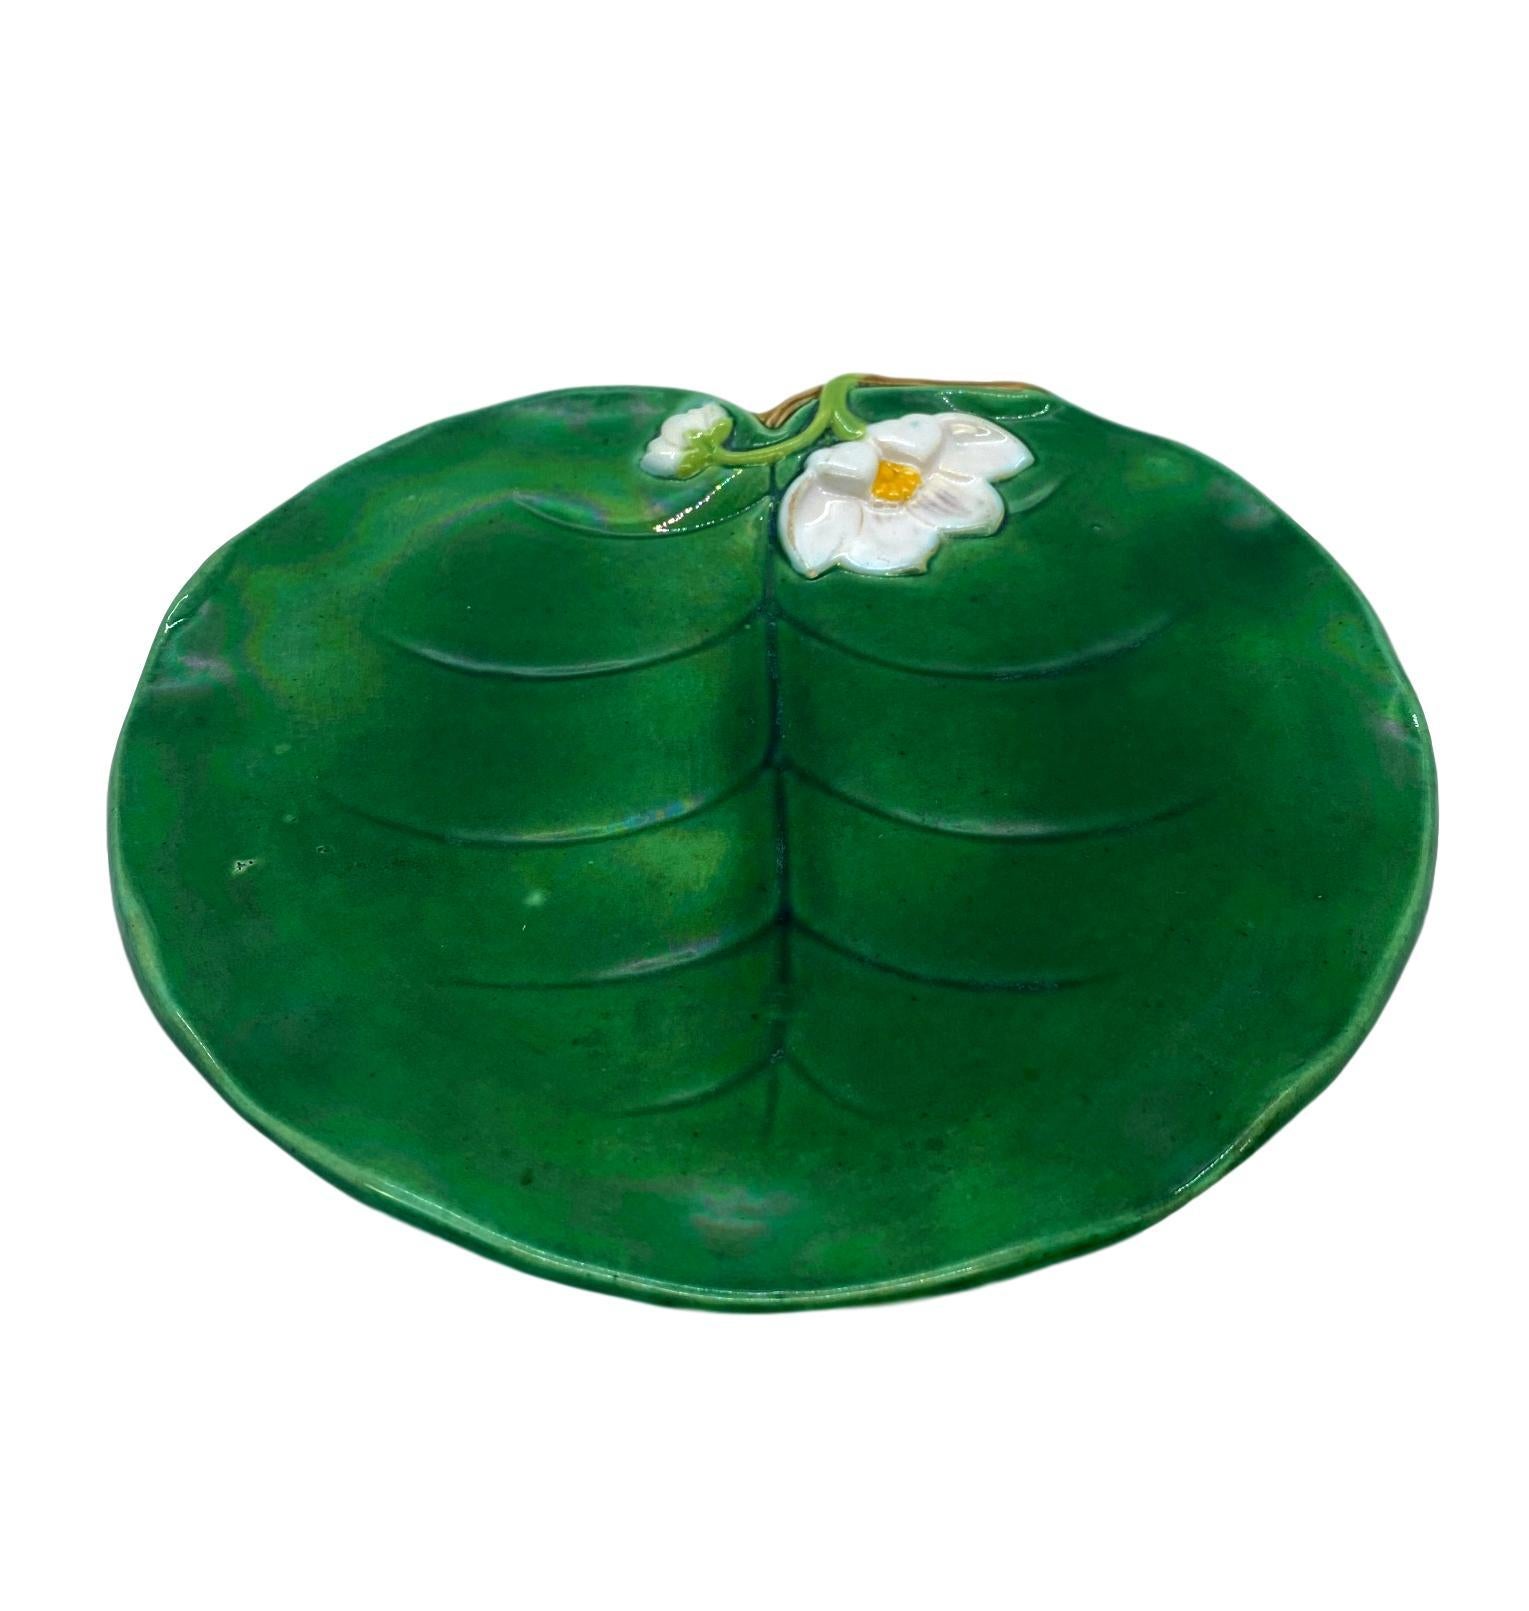 George Jones Majolica Water Lily plate glazed in lush greens, with a relief-molded lily flower, English, 1877. 
Marks to reverse: 'GJ' Monogram; British Registry Lozenge for 9 March 1869, the date the pattern was registered; George Jones date